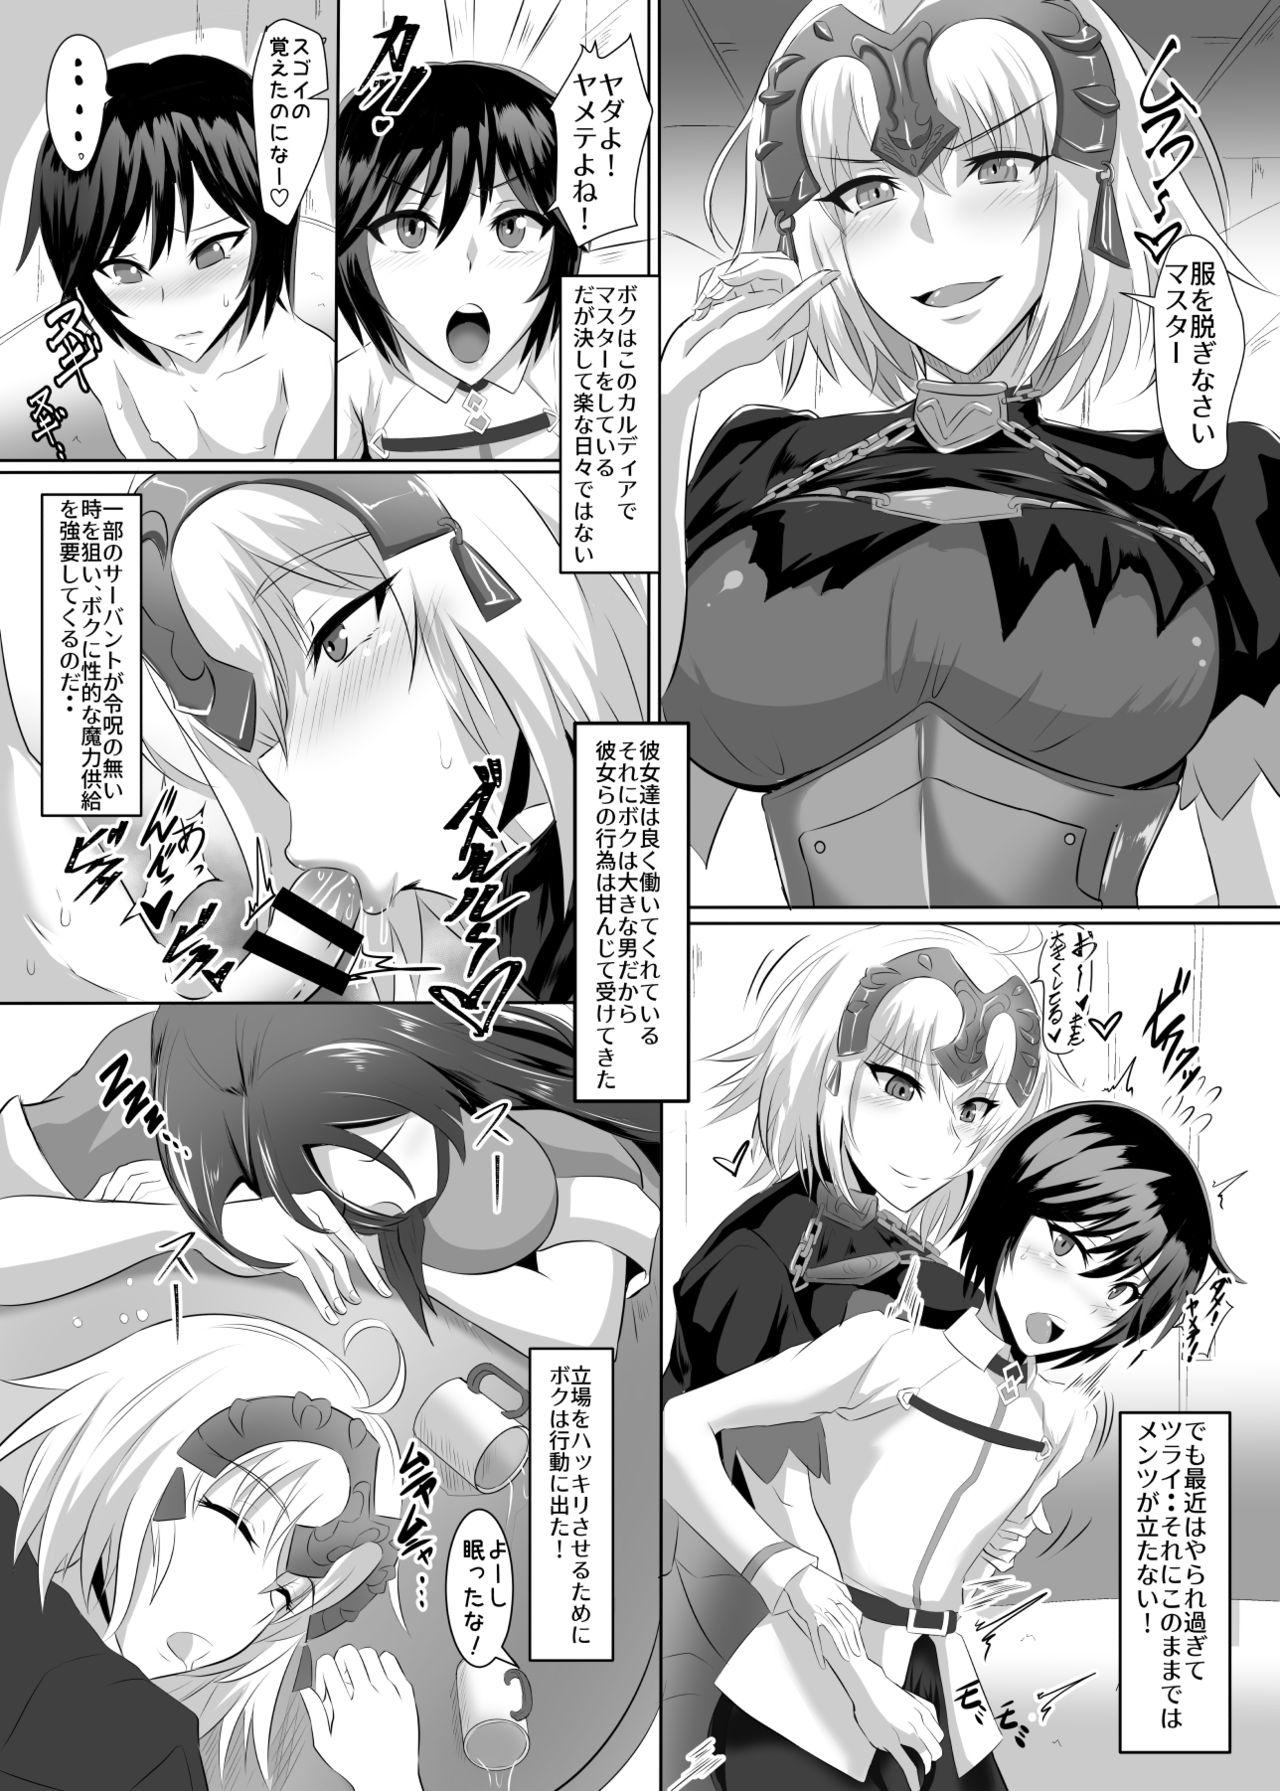 Kiss Gehenna 7 - Fate grand order Gapes Gaping Asshole - Page 4